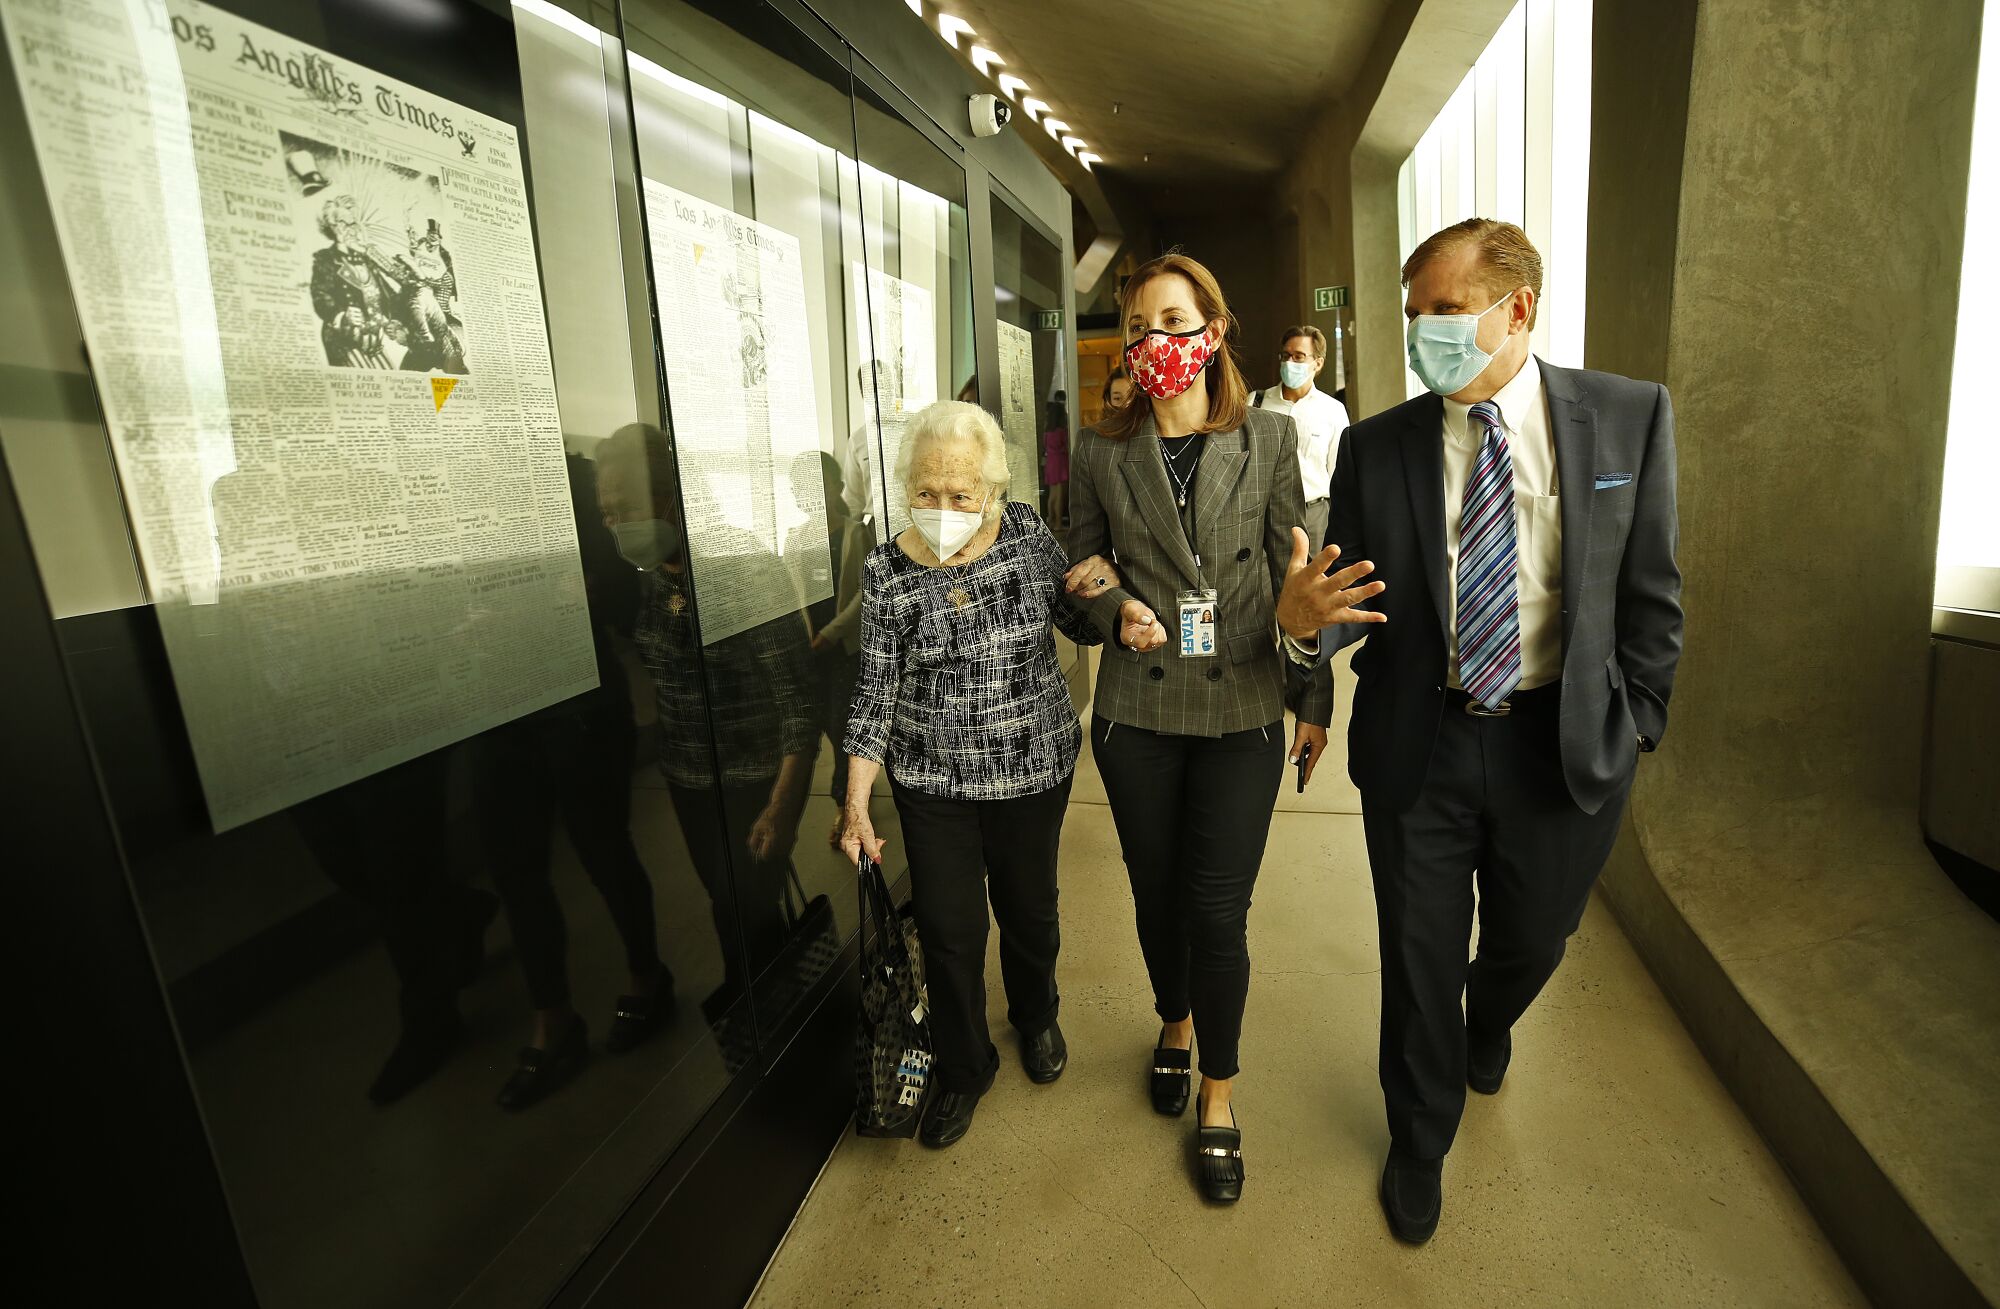 Three people walk down a hallway whose walls are lined with framed newspaper pages